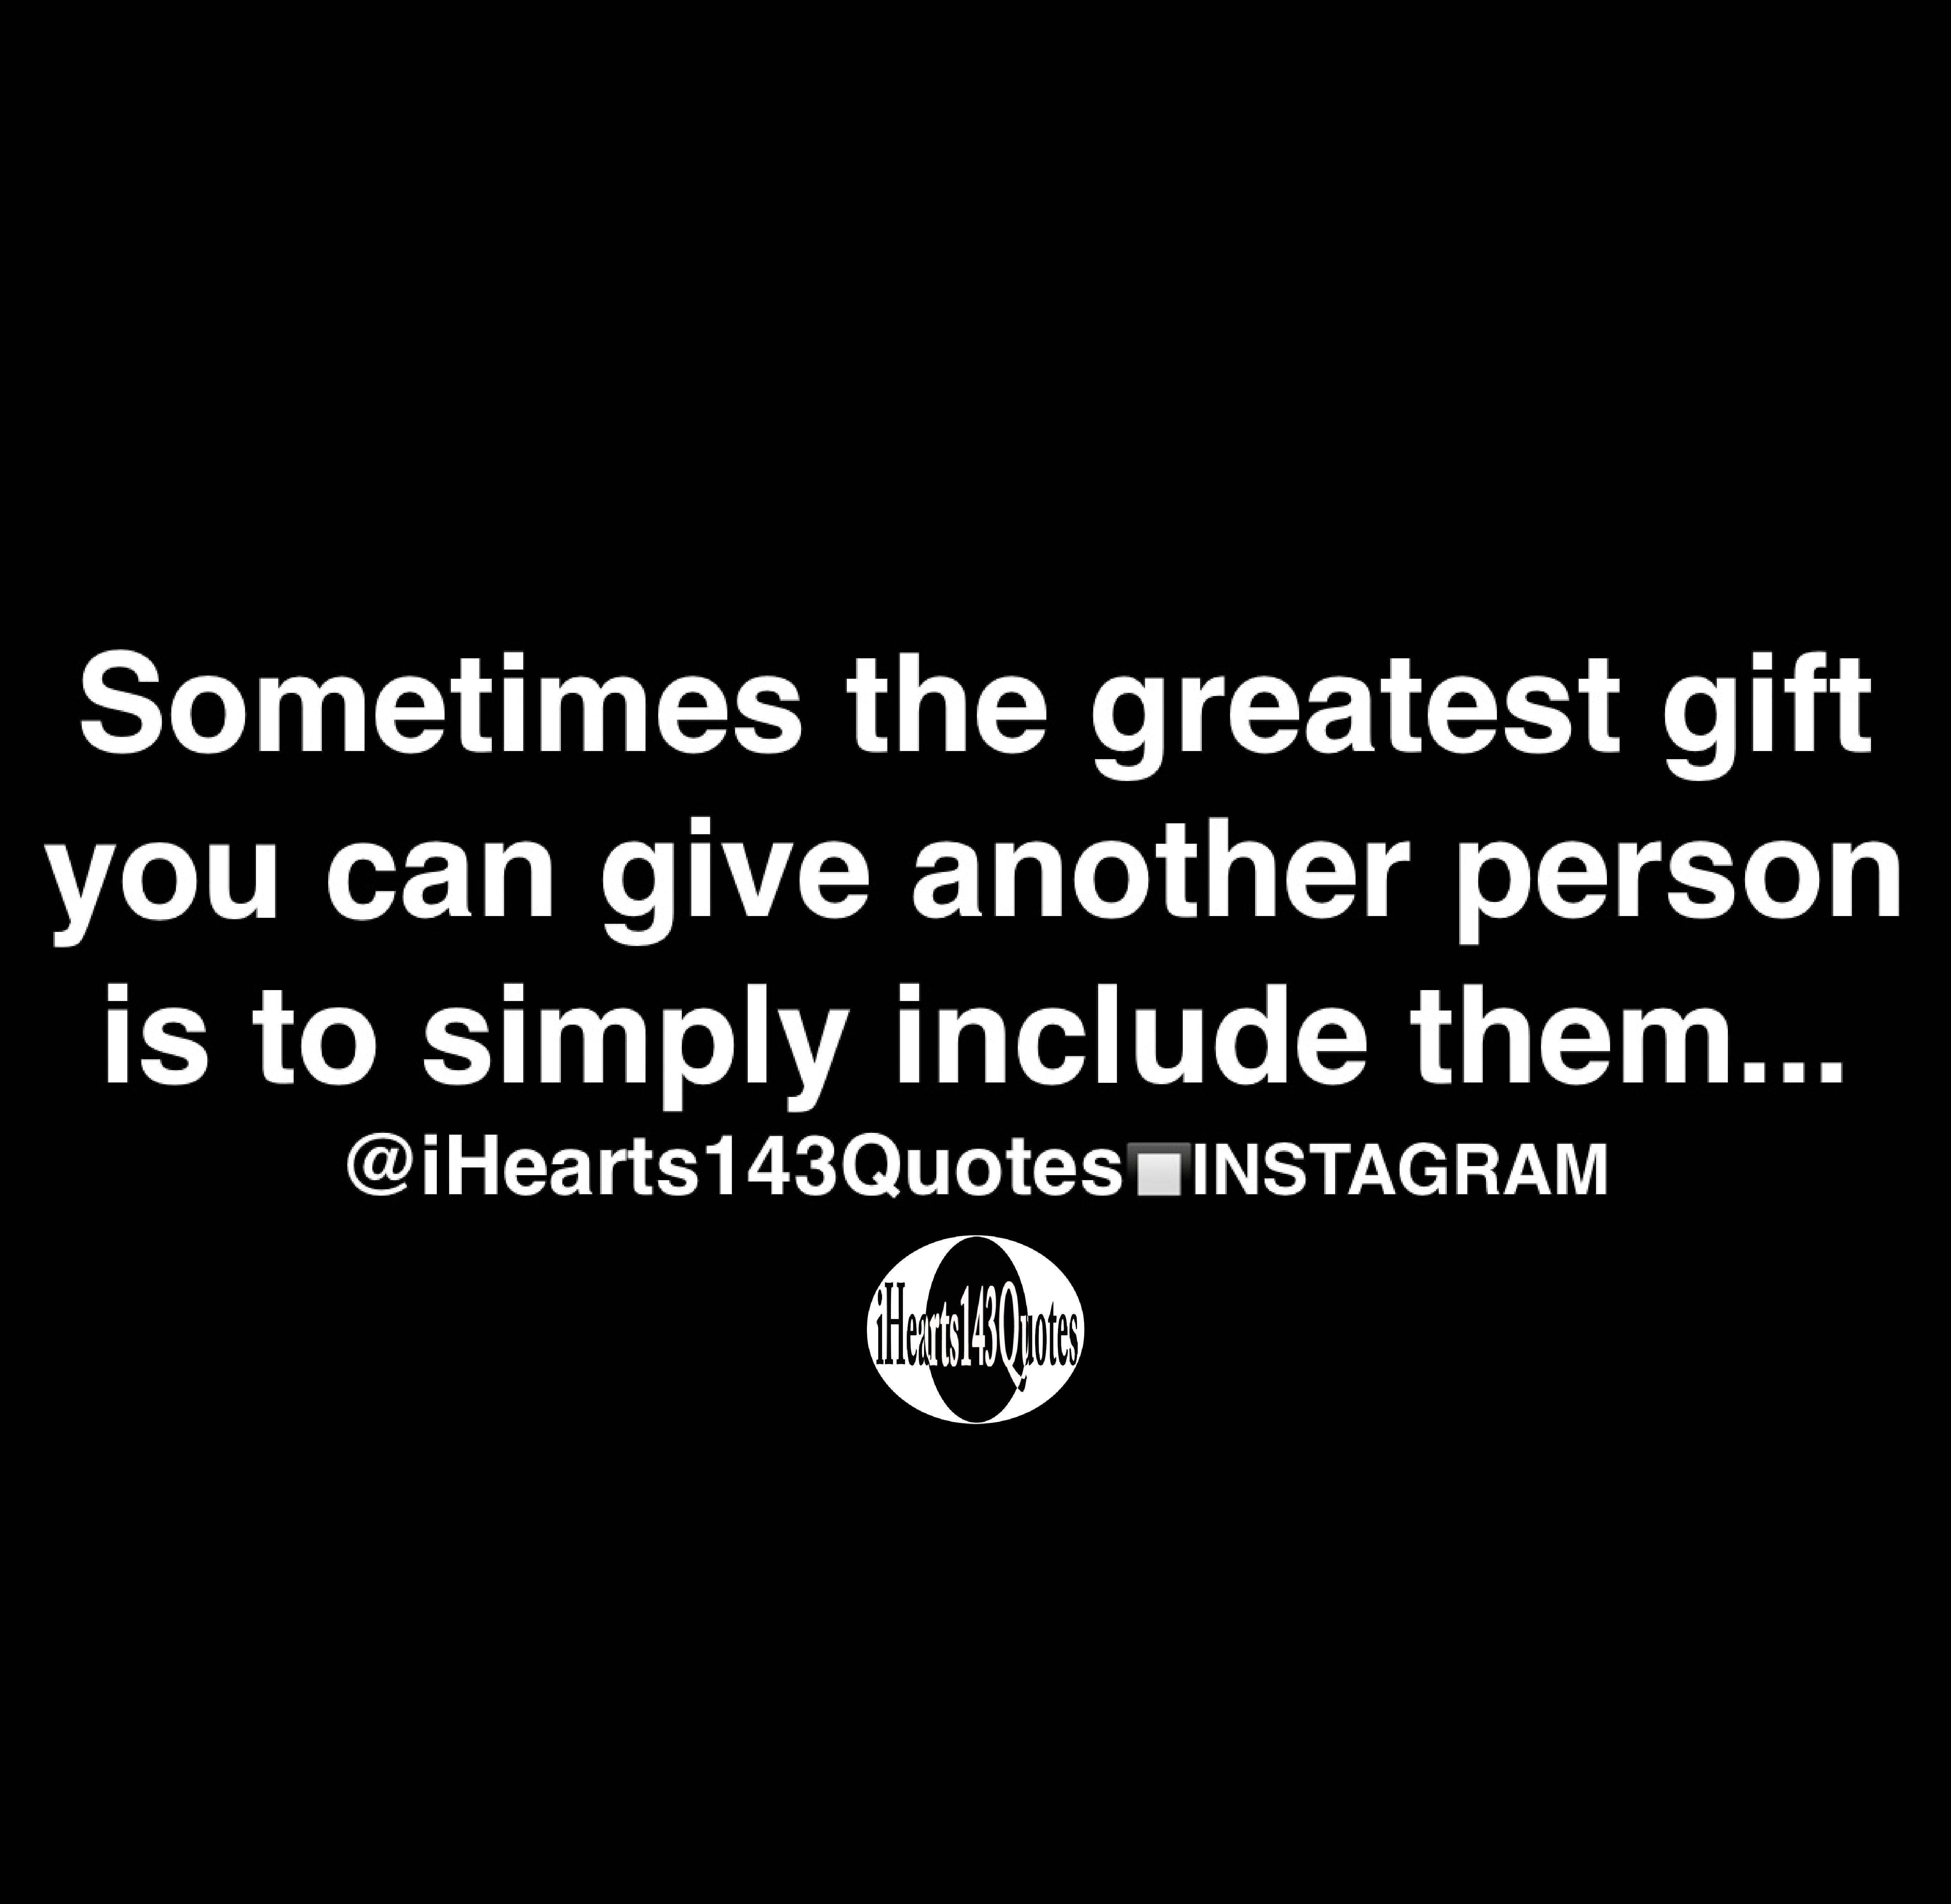 Sometimes The Greatest Gift You Can Give Another Person Is To Simply Include Them Quotes Ihearts143quotes